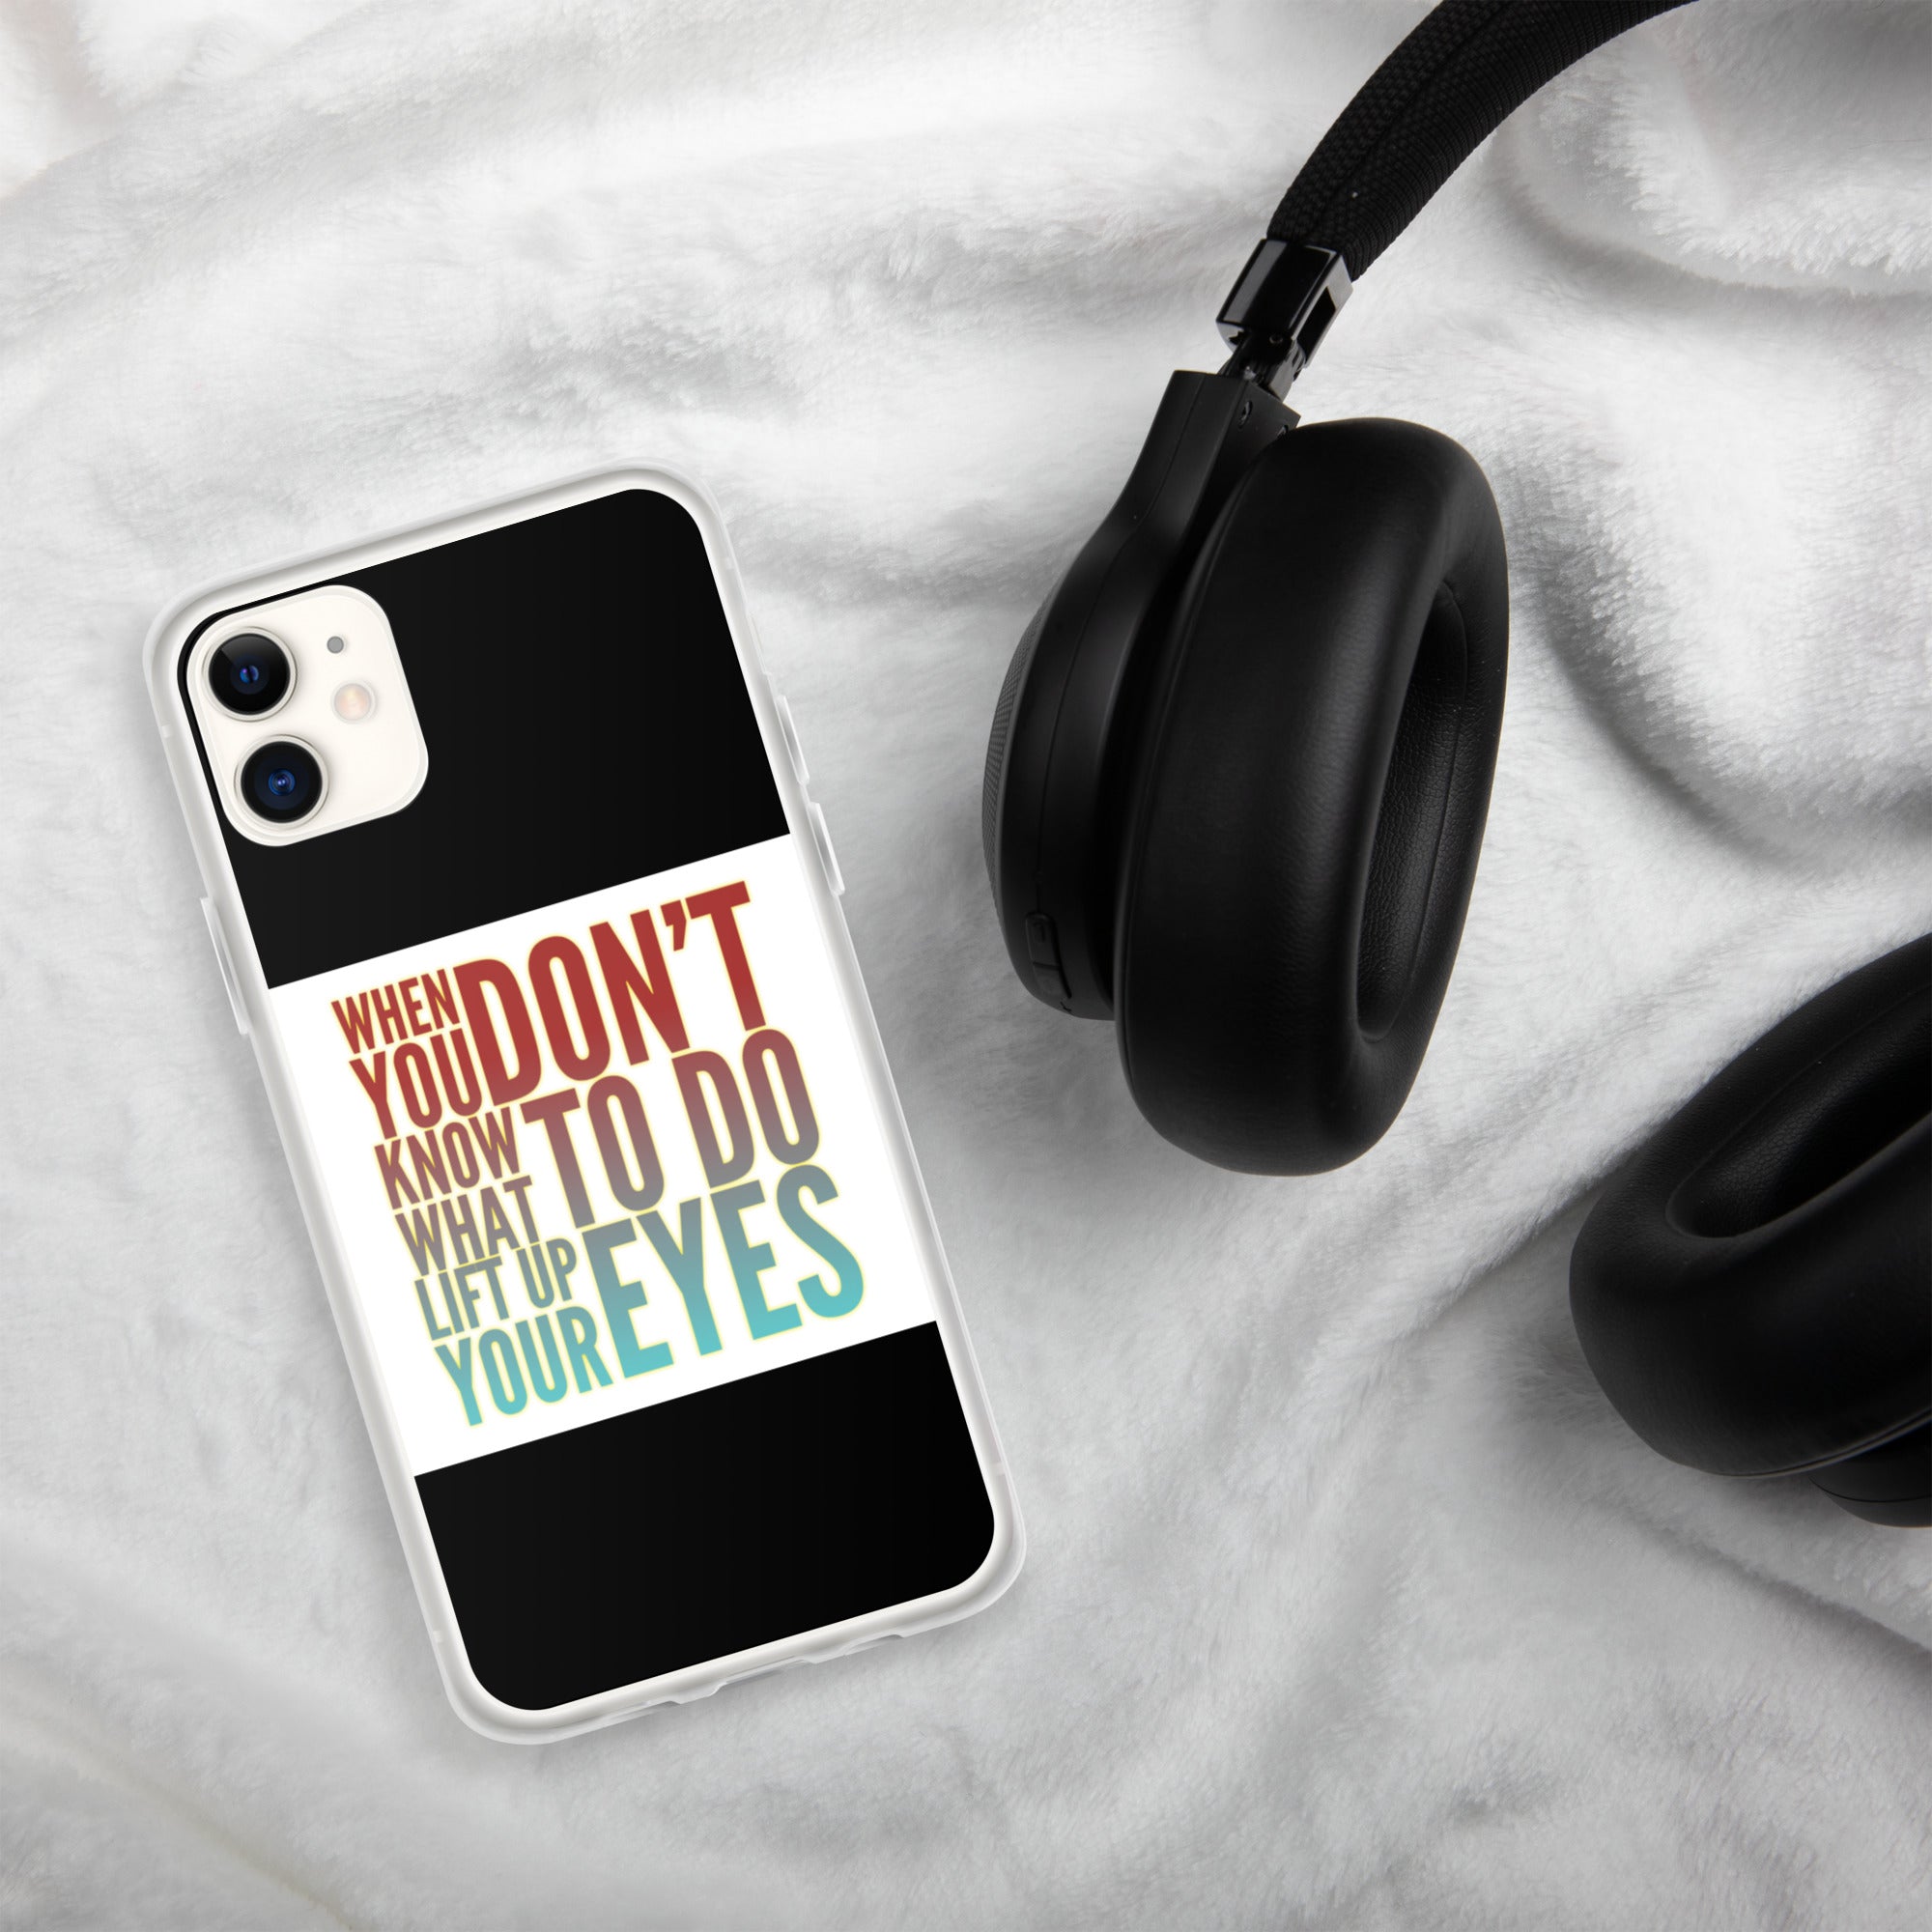 GloWell Designs - iPhone Case - Motivational Quote - Lift Up Your Eyes - GloWell Designs